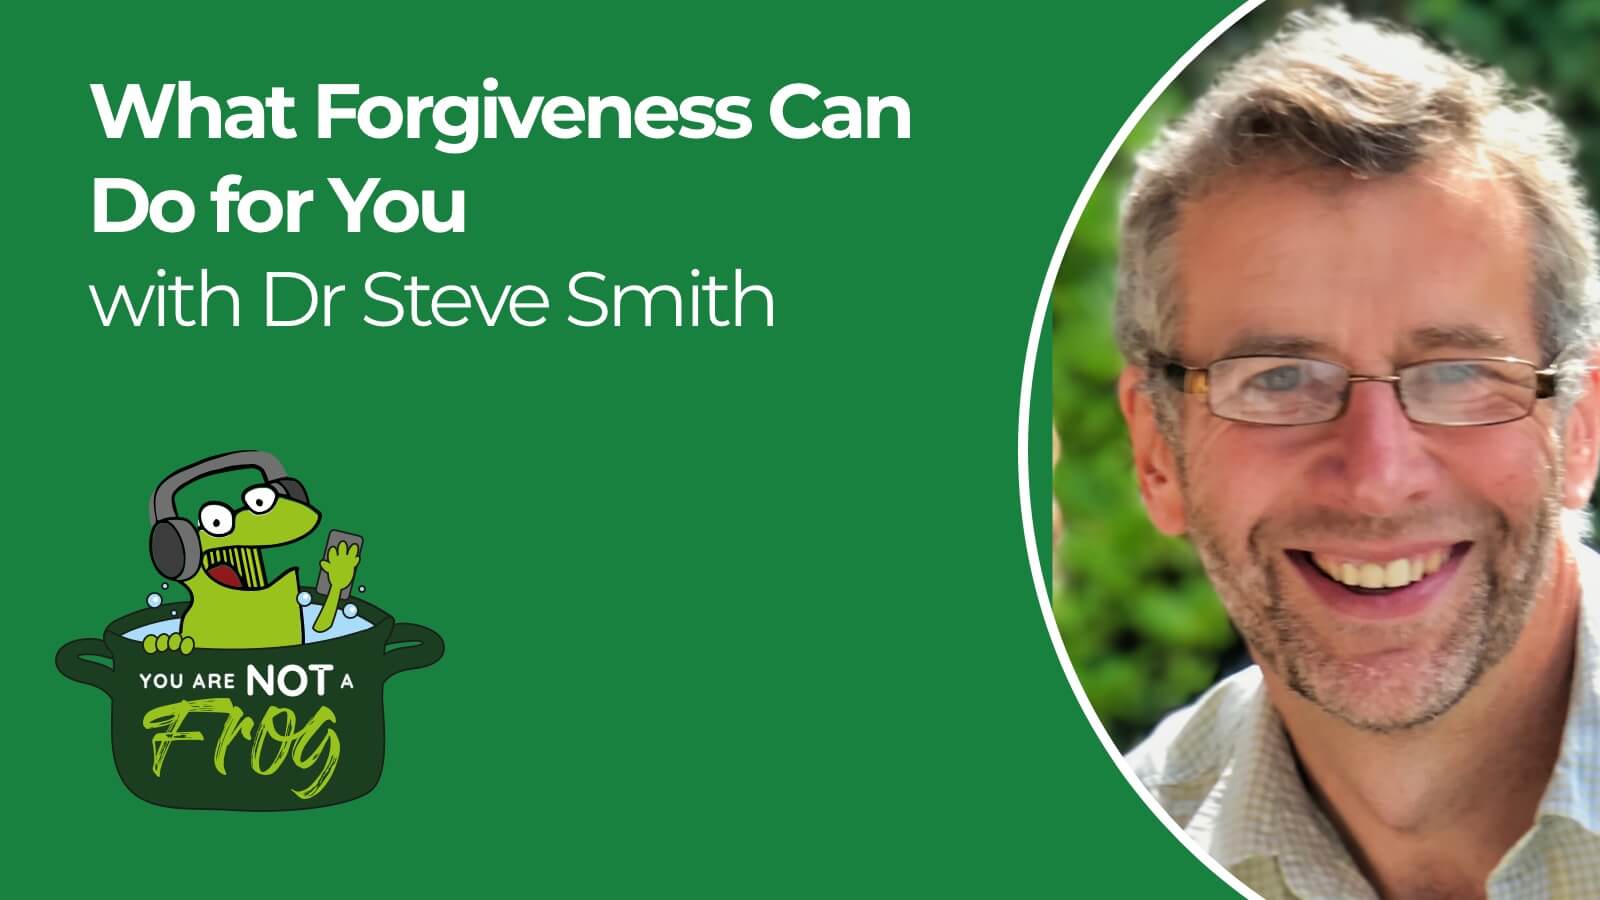 What Forgiveness Can Do for You